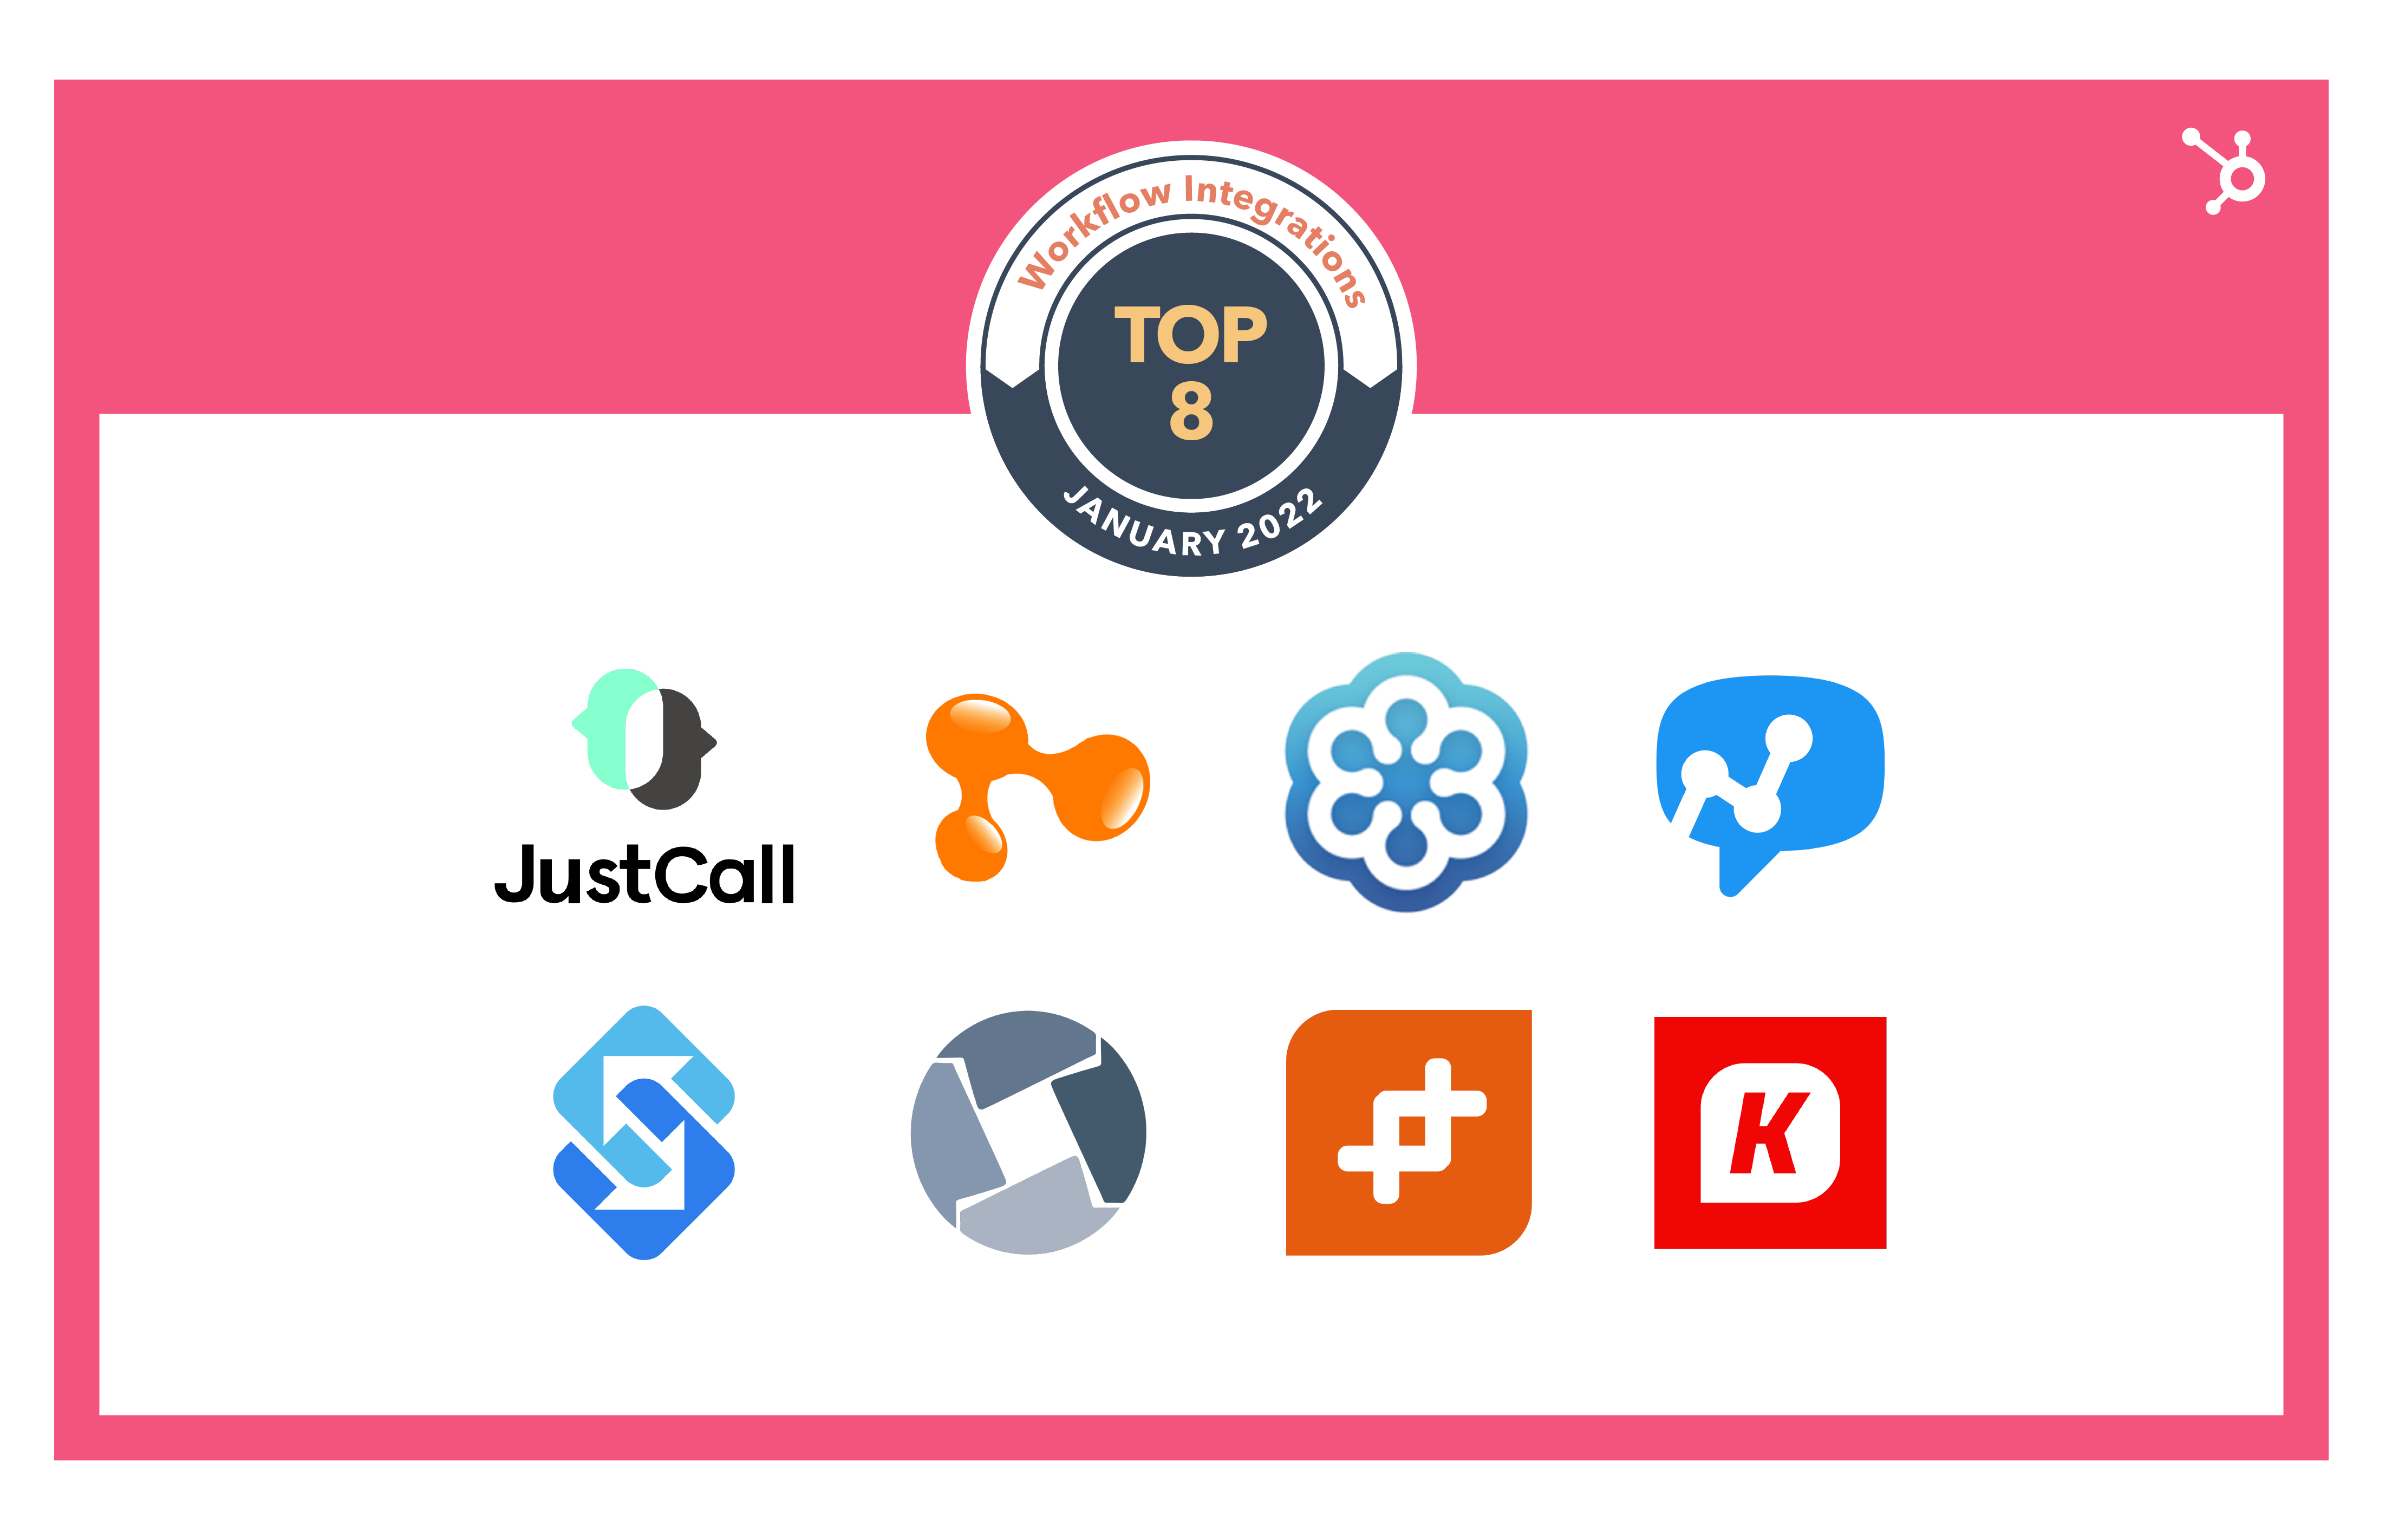 The most popular workflow integrations